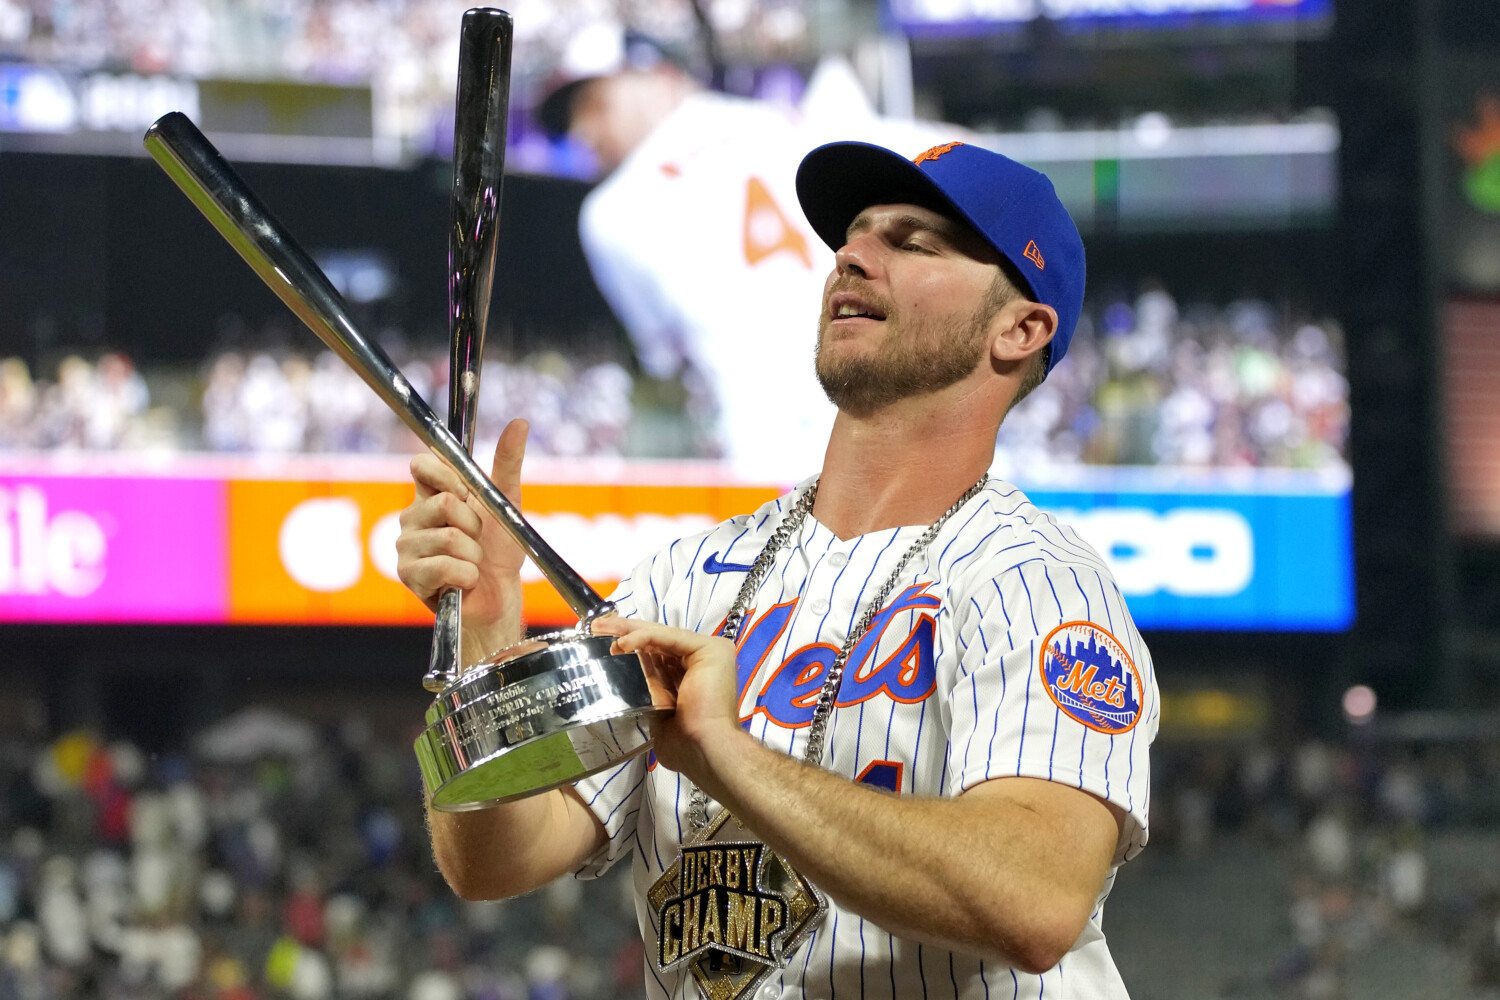 Back-to-back jack champ: Pete Alonso wins second straight Home Run